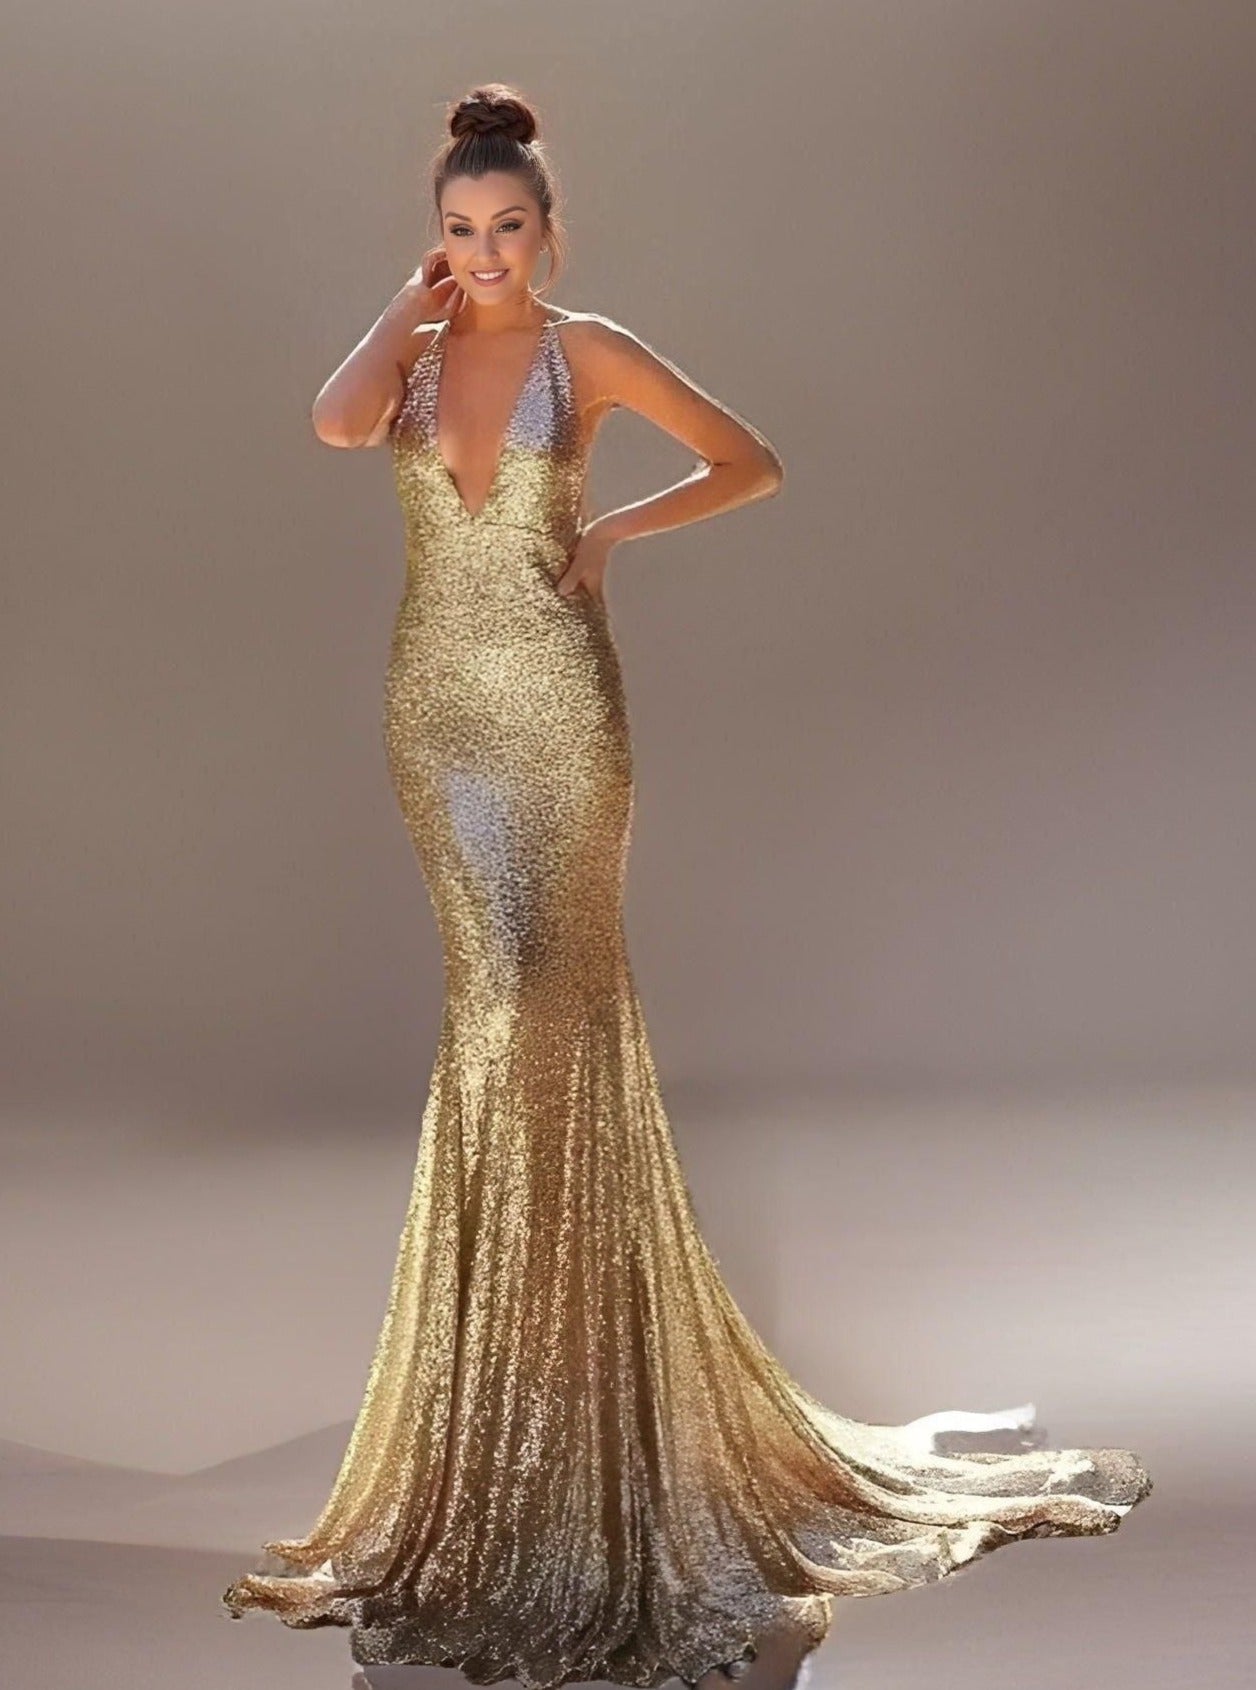 Smiling woman feeling sexy in Gold Sequined Backless Evening Gown with V Neck